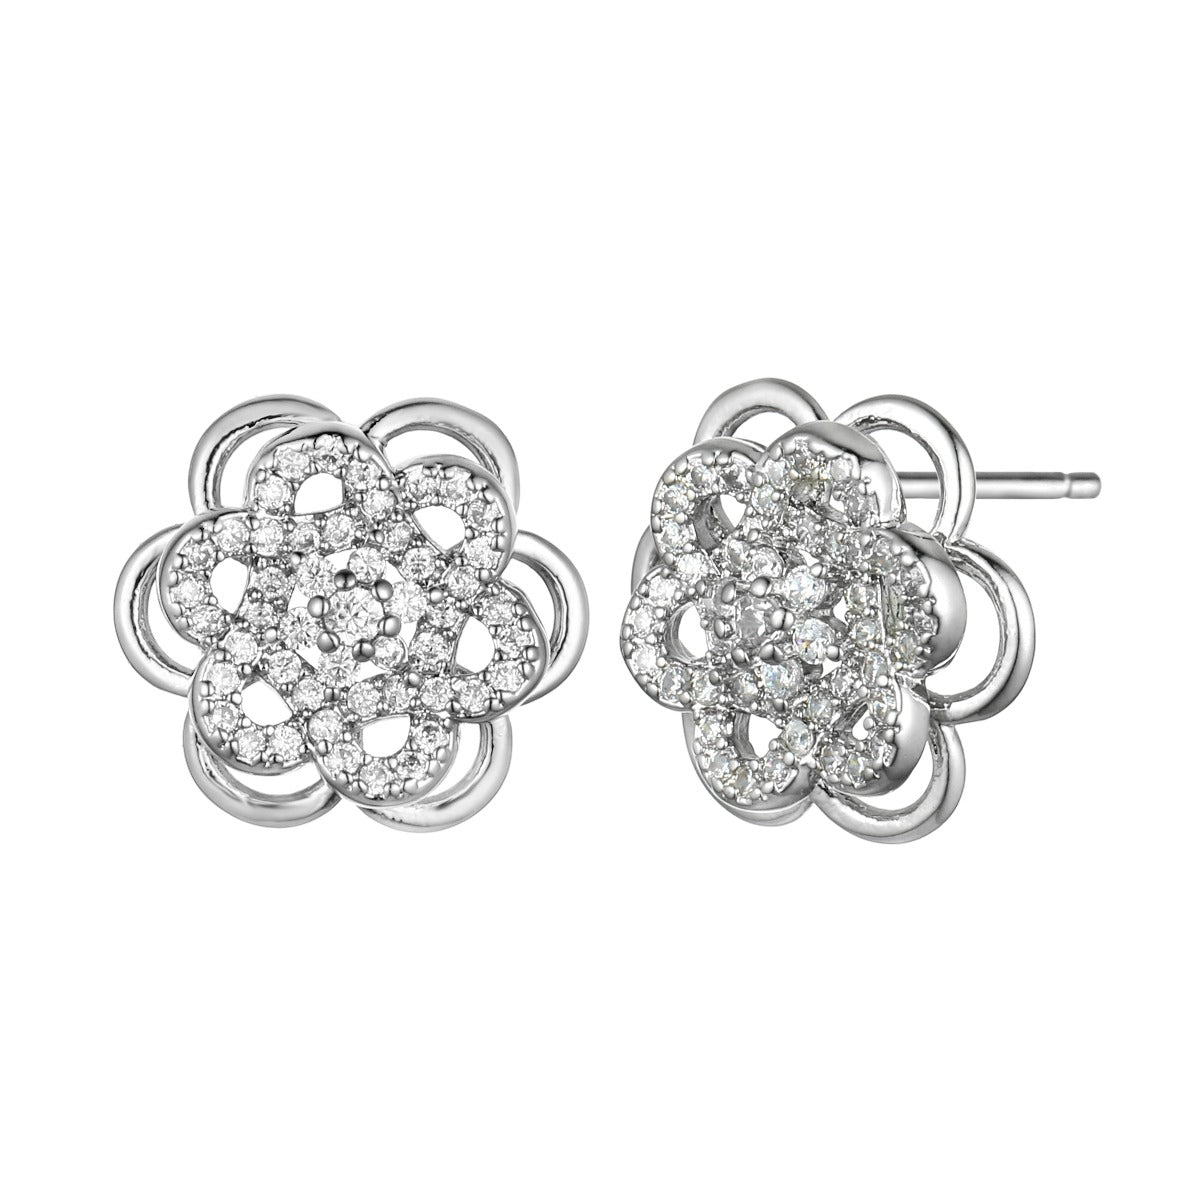 SIlver Gold Plated Flower Earrings with Diamantes and Gems YX12014SLR